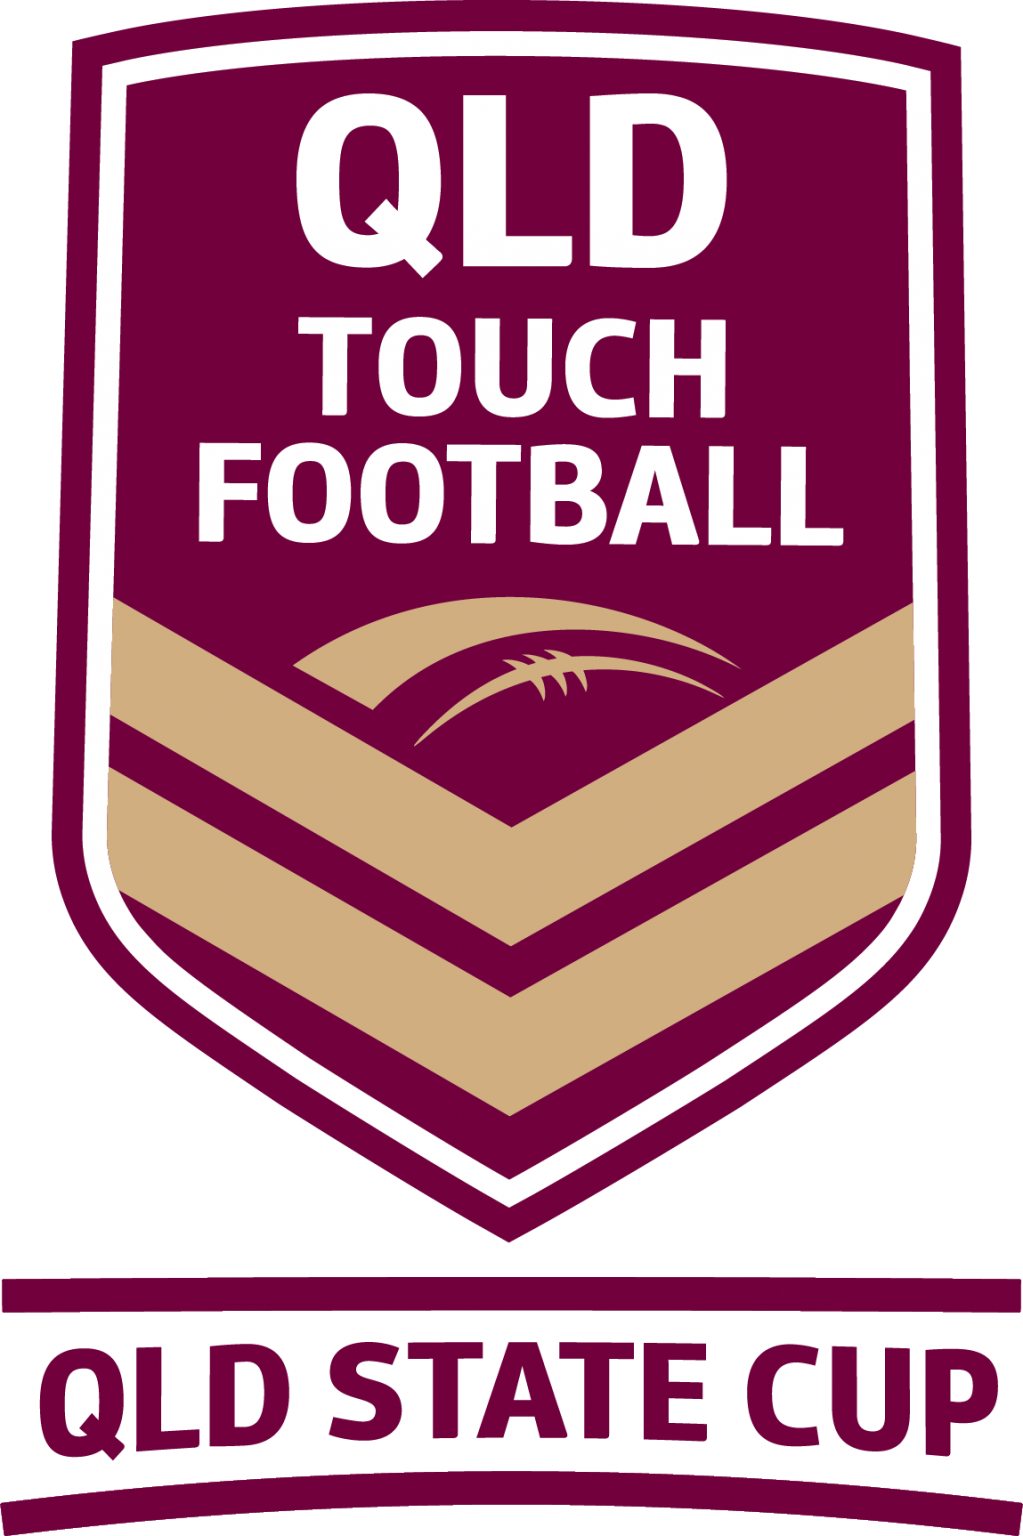 About The Queensland Touch Football QLD State Cup